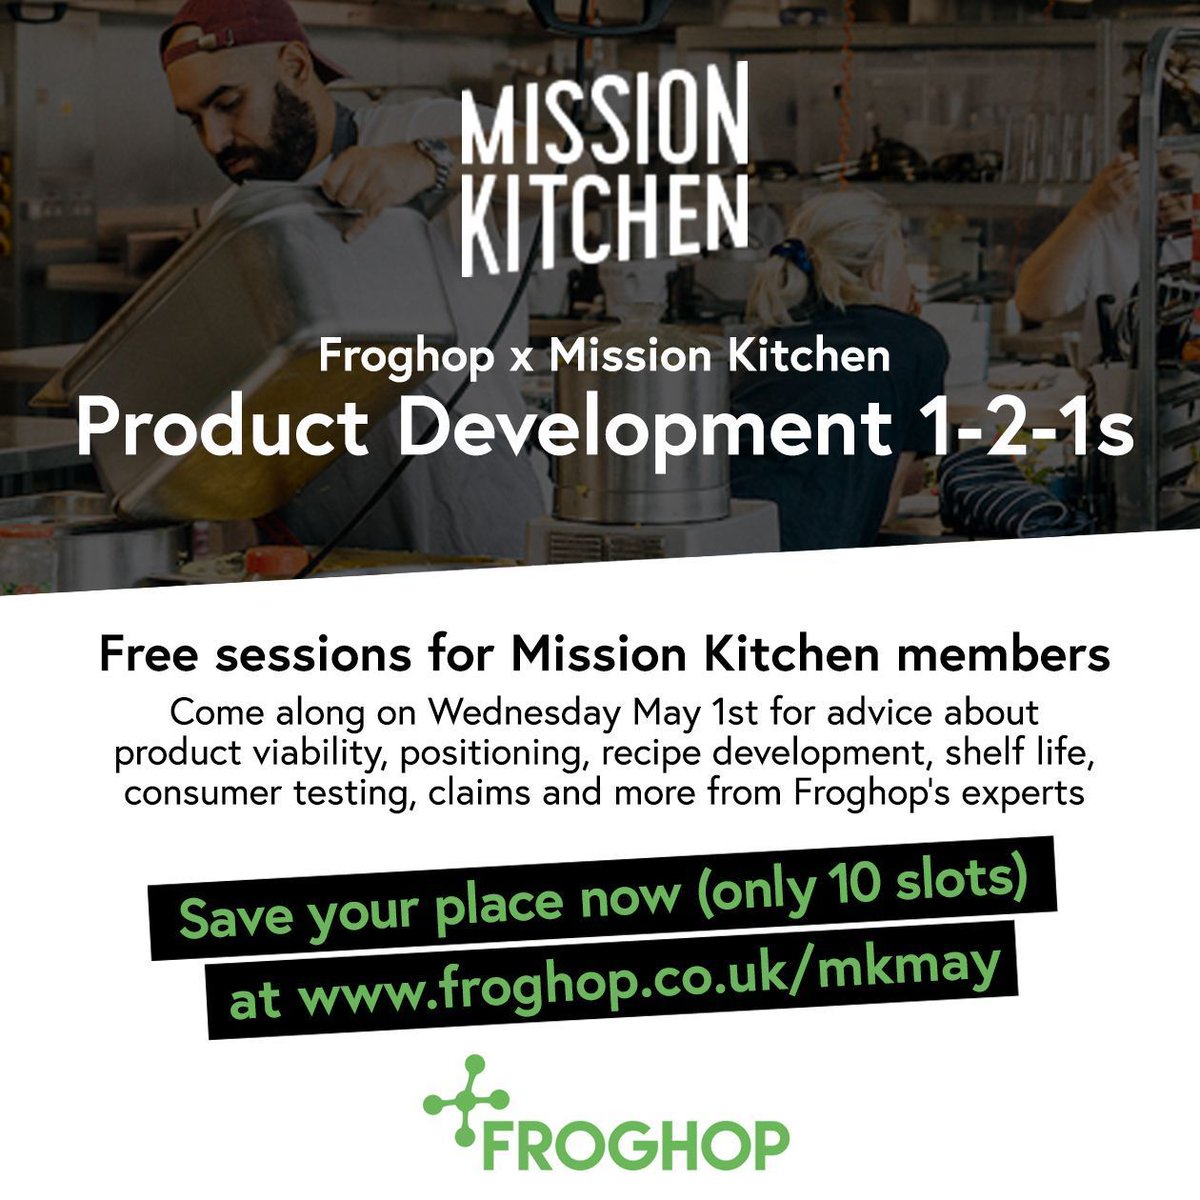 Expert 1-2-1s for @mission_kitchen members on Weds May 1st. Get expert advice on your food or drink product development challenges. Save your place now 👉 buff.ly/3QeoBRs

#npd #foodproductdevelopment #foodscaleup #foodstartup #missionkitchen #foodpreneur #foodbusiness